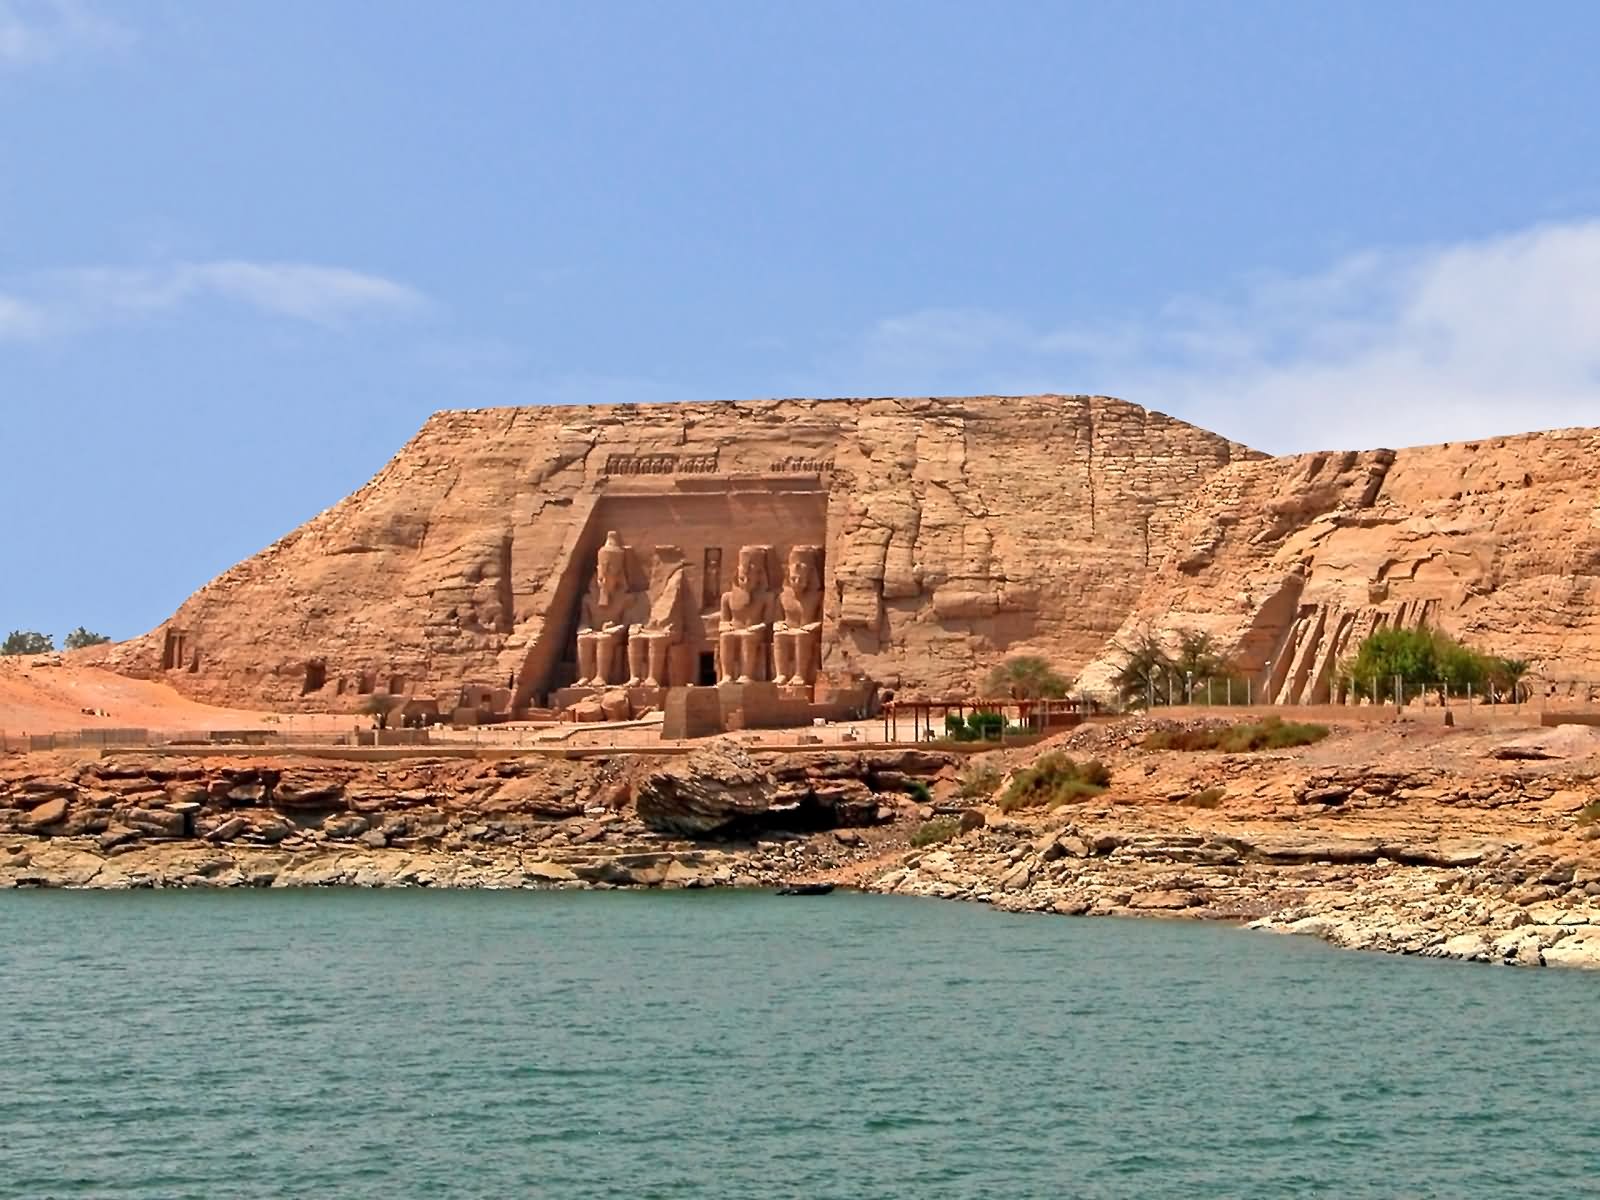 The View Of Abu Simbel Across The River